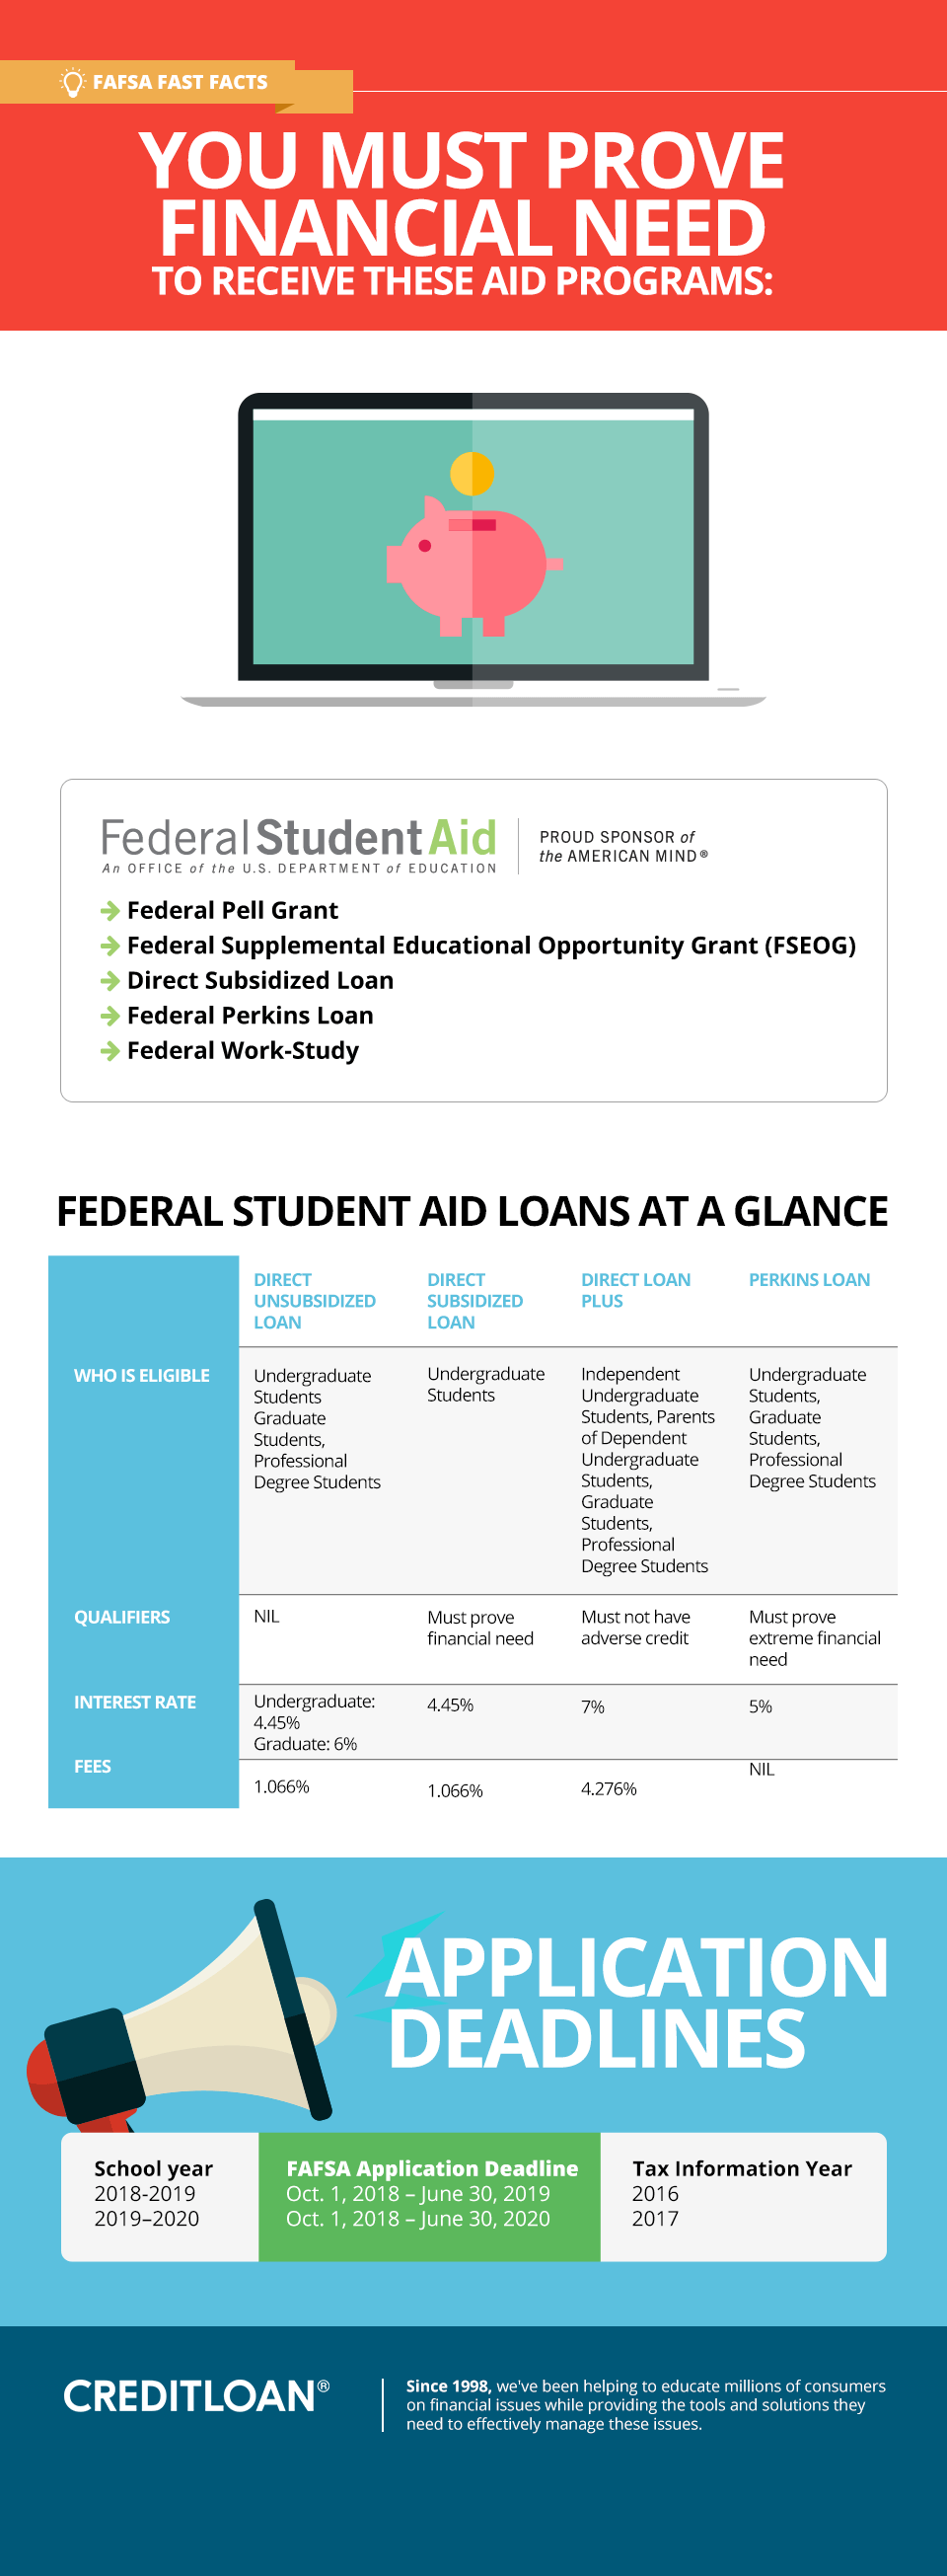 You must prove financial need to qualify for FAFSA